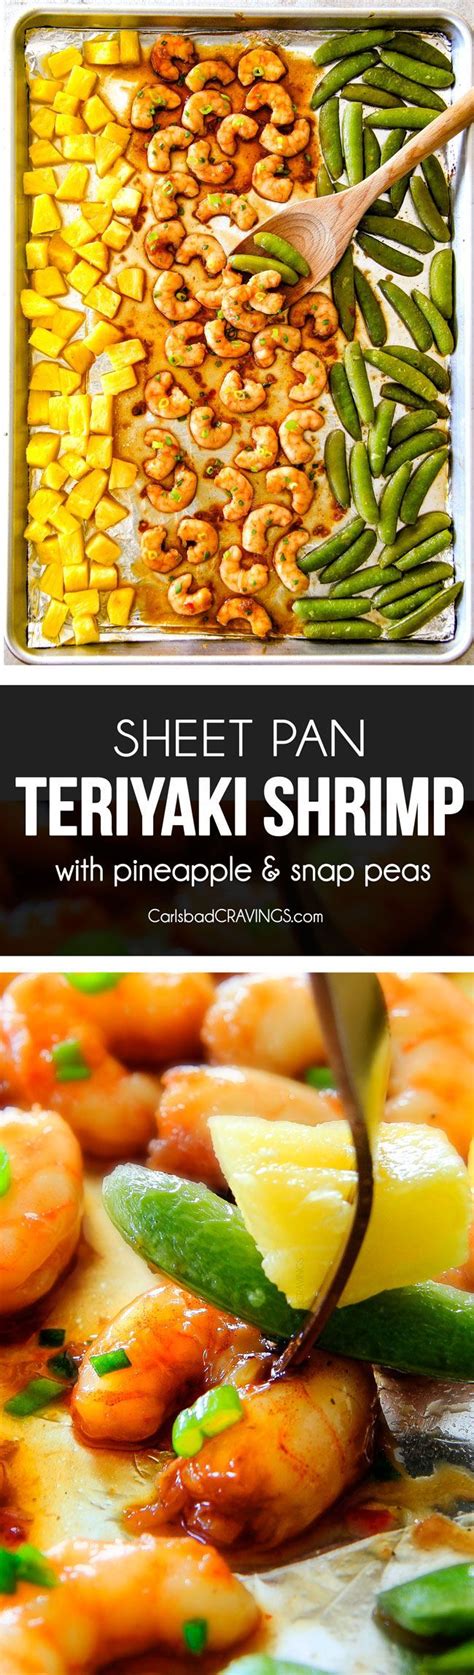 This informative diabetic food list shows the best foods for diabetics as recommended by a vegetables are the best foods for diabetics. I am in love with this Sheet Pan Teriyaki Shrimp ...